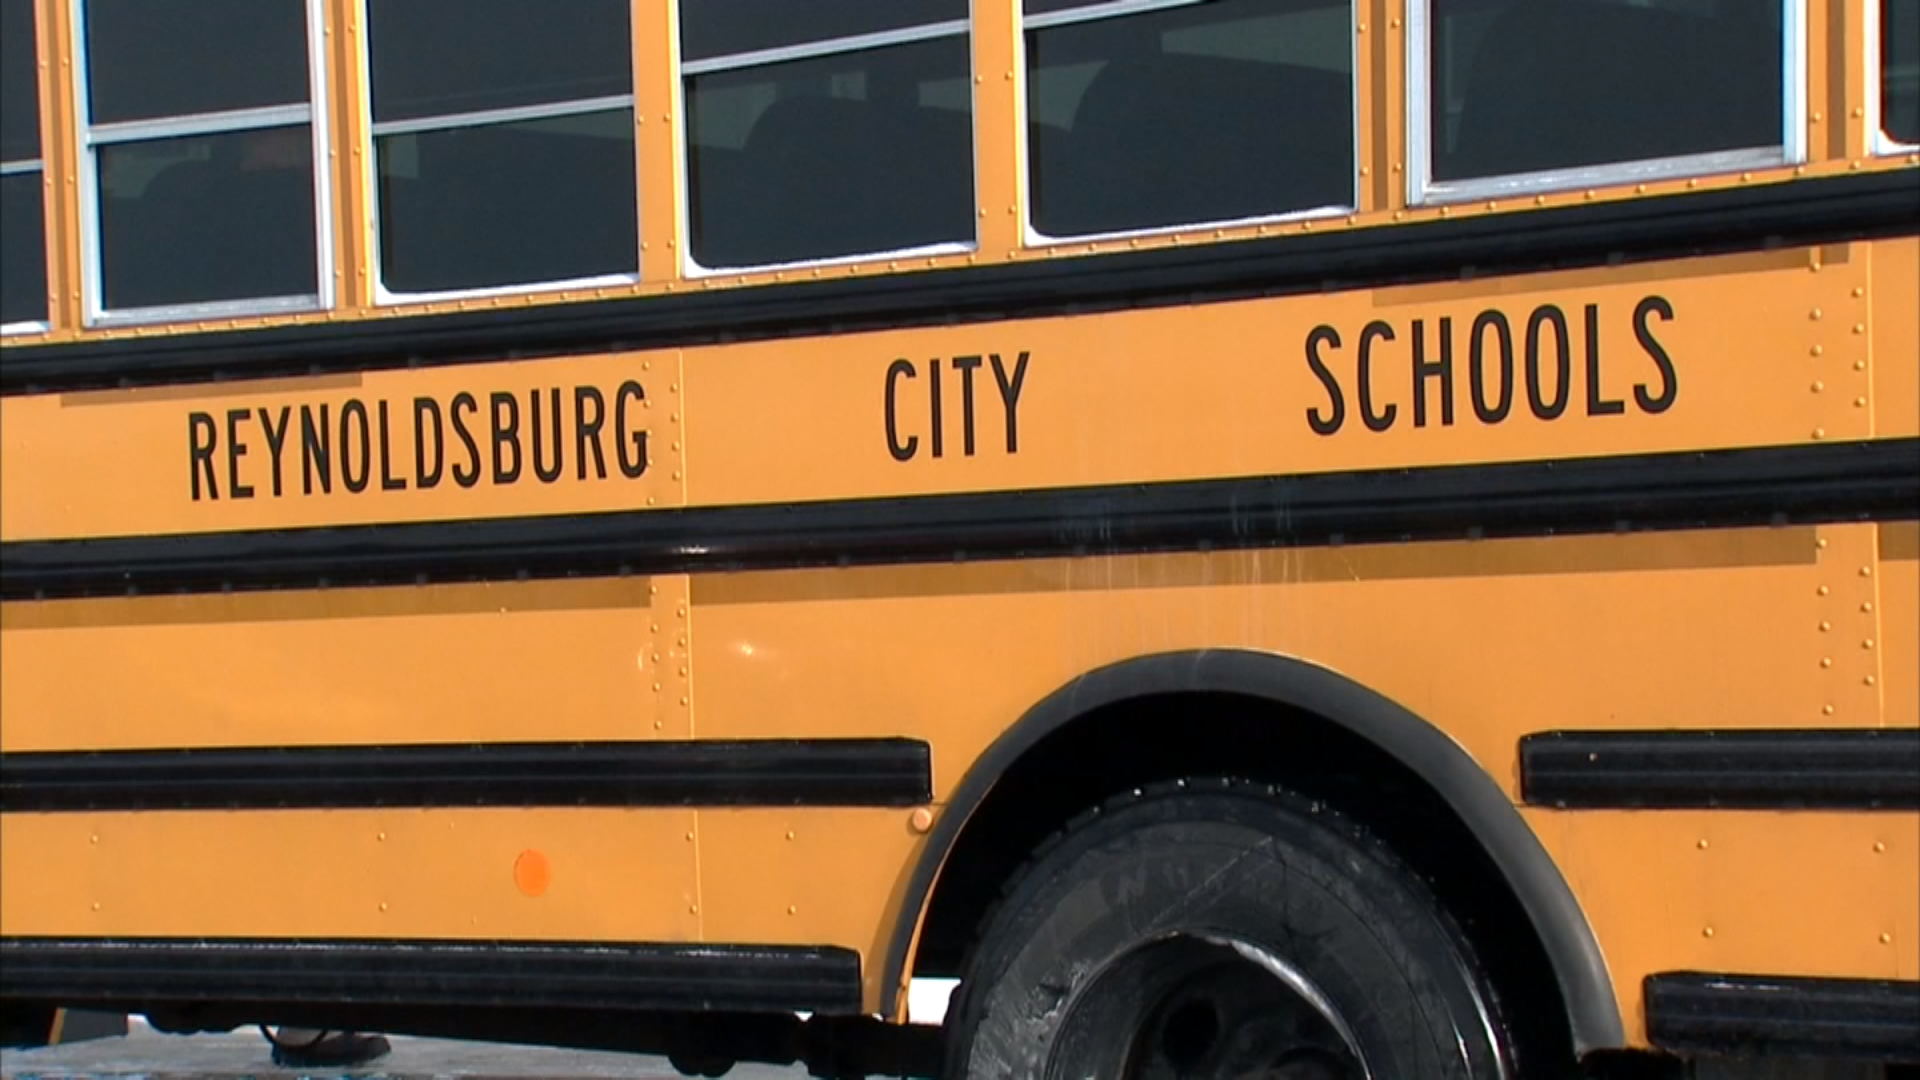 The district says those schools chosen are based off of the bus routes most impacted by shortages.